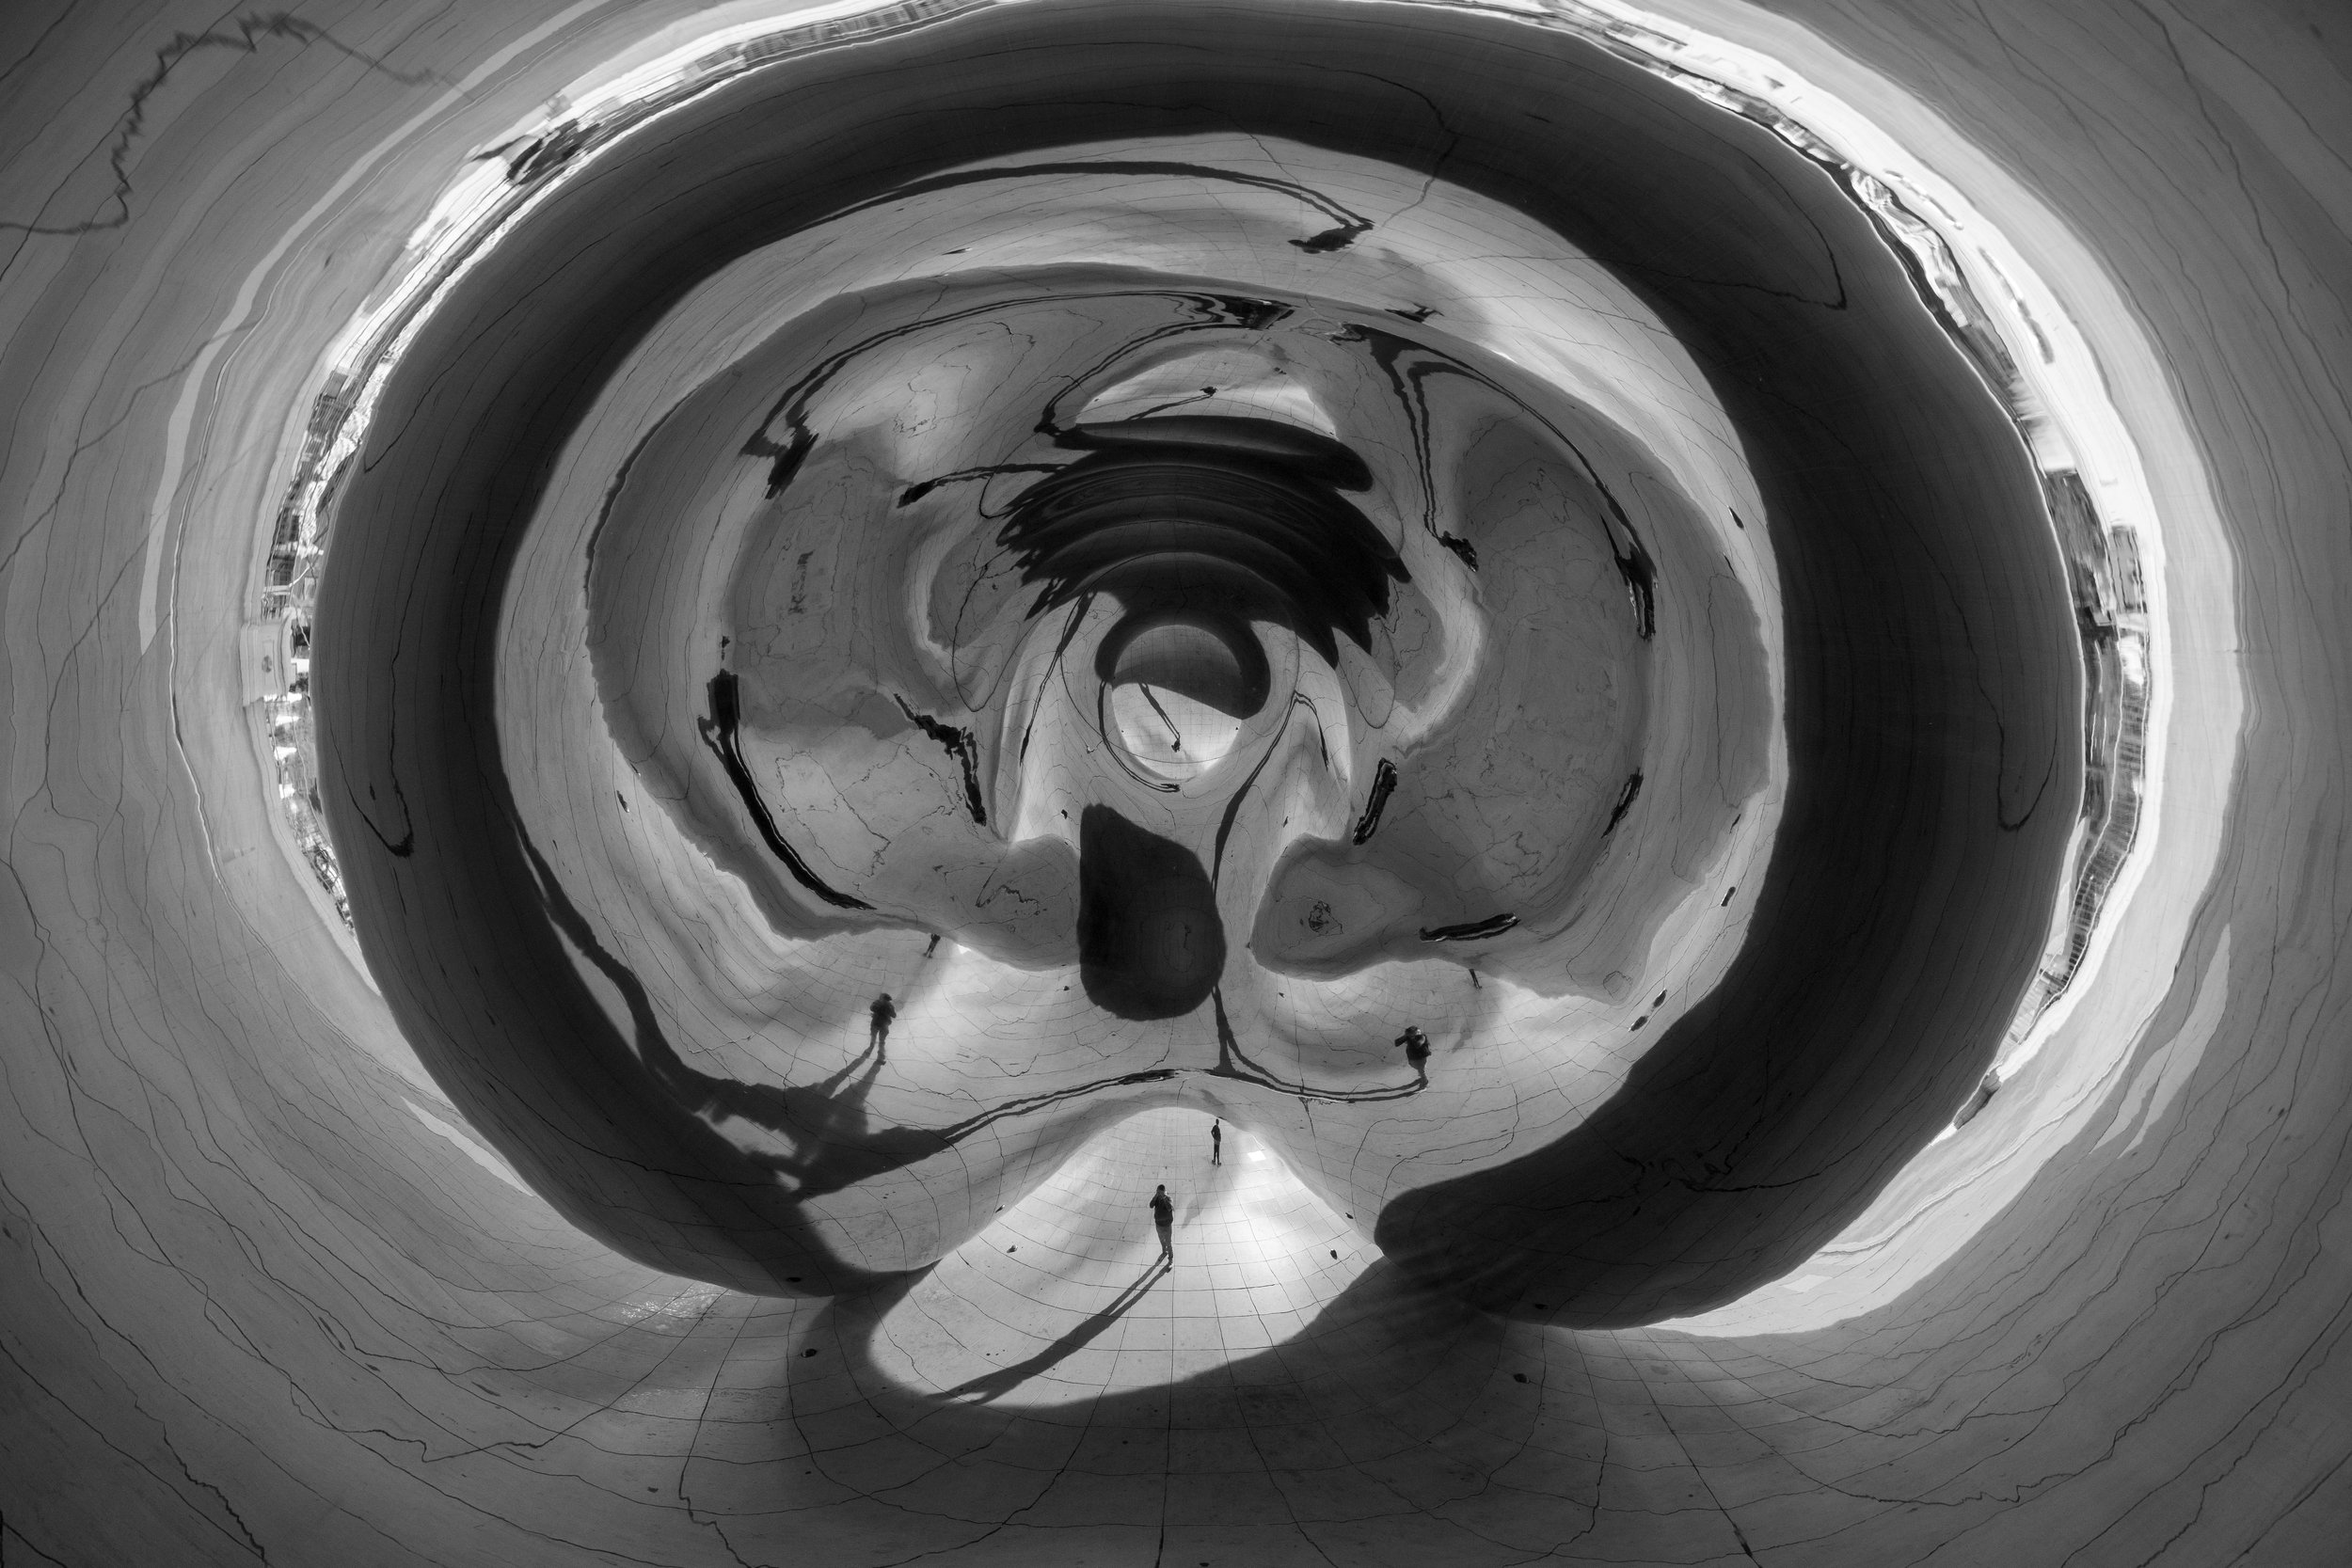  Abstract self portrait in The Bean. 